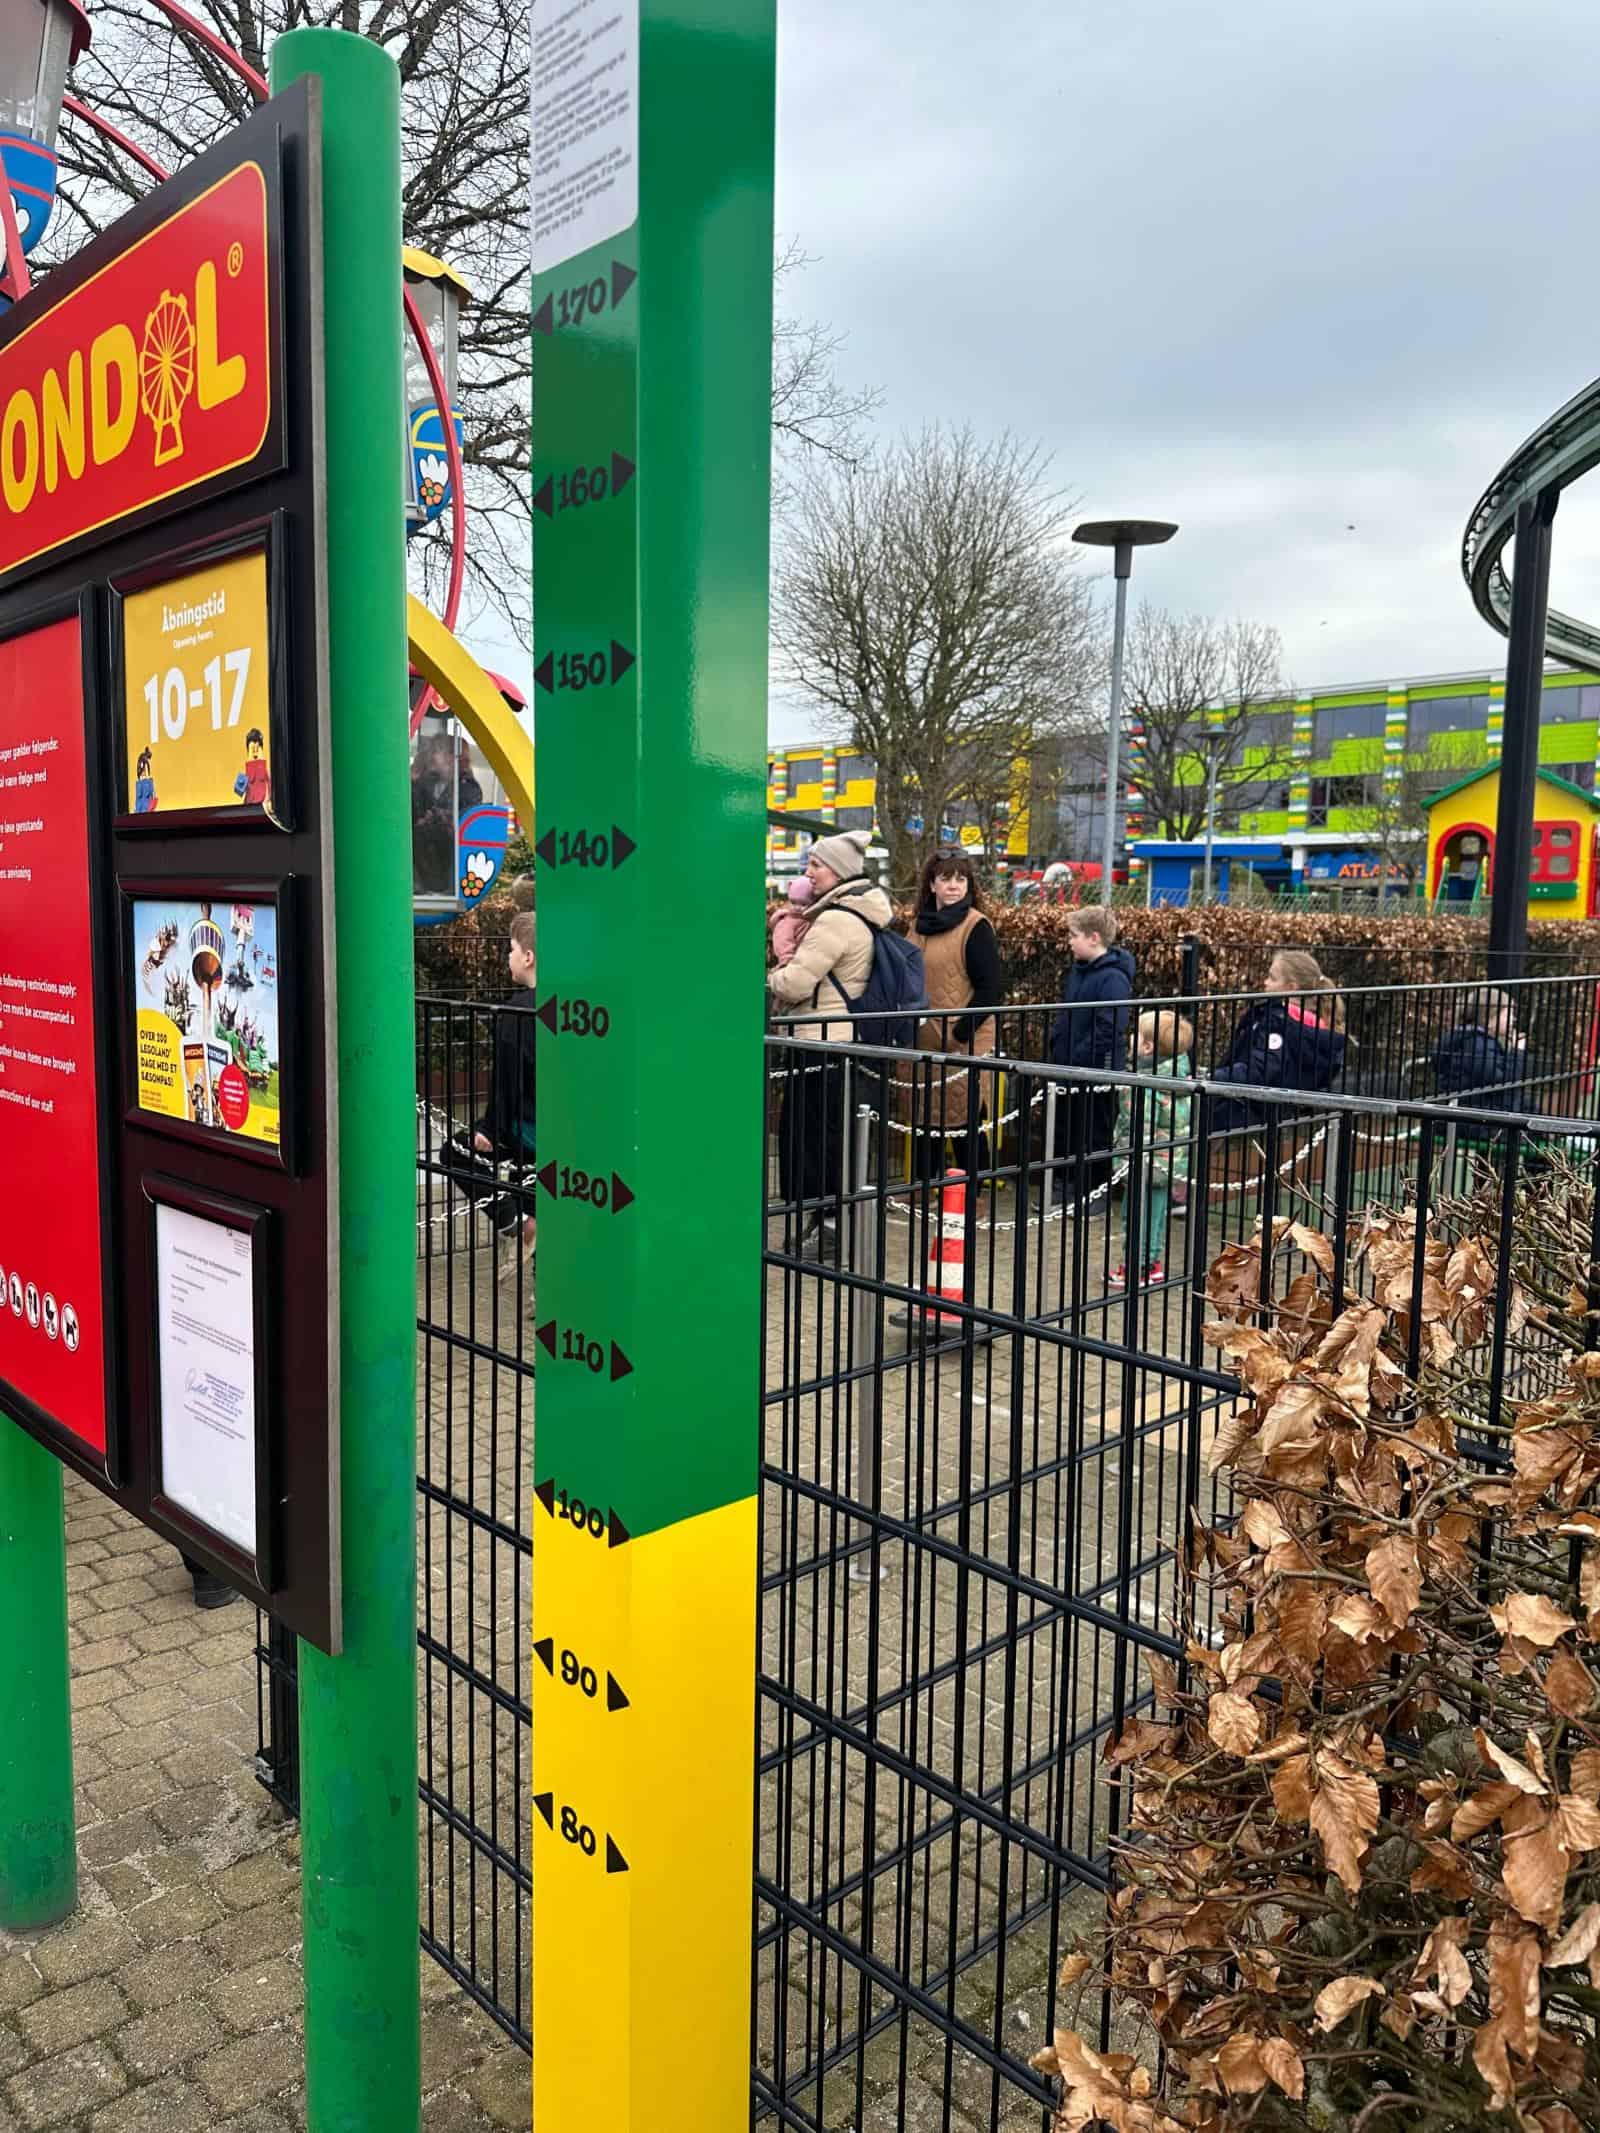 View of ride height requirements at Legoland Billund